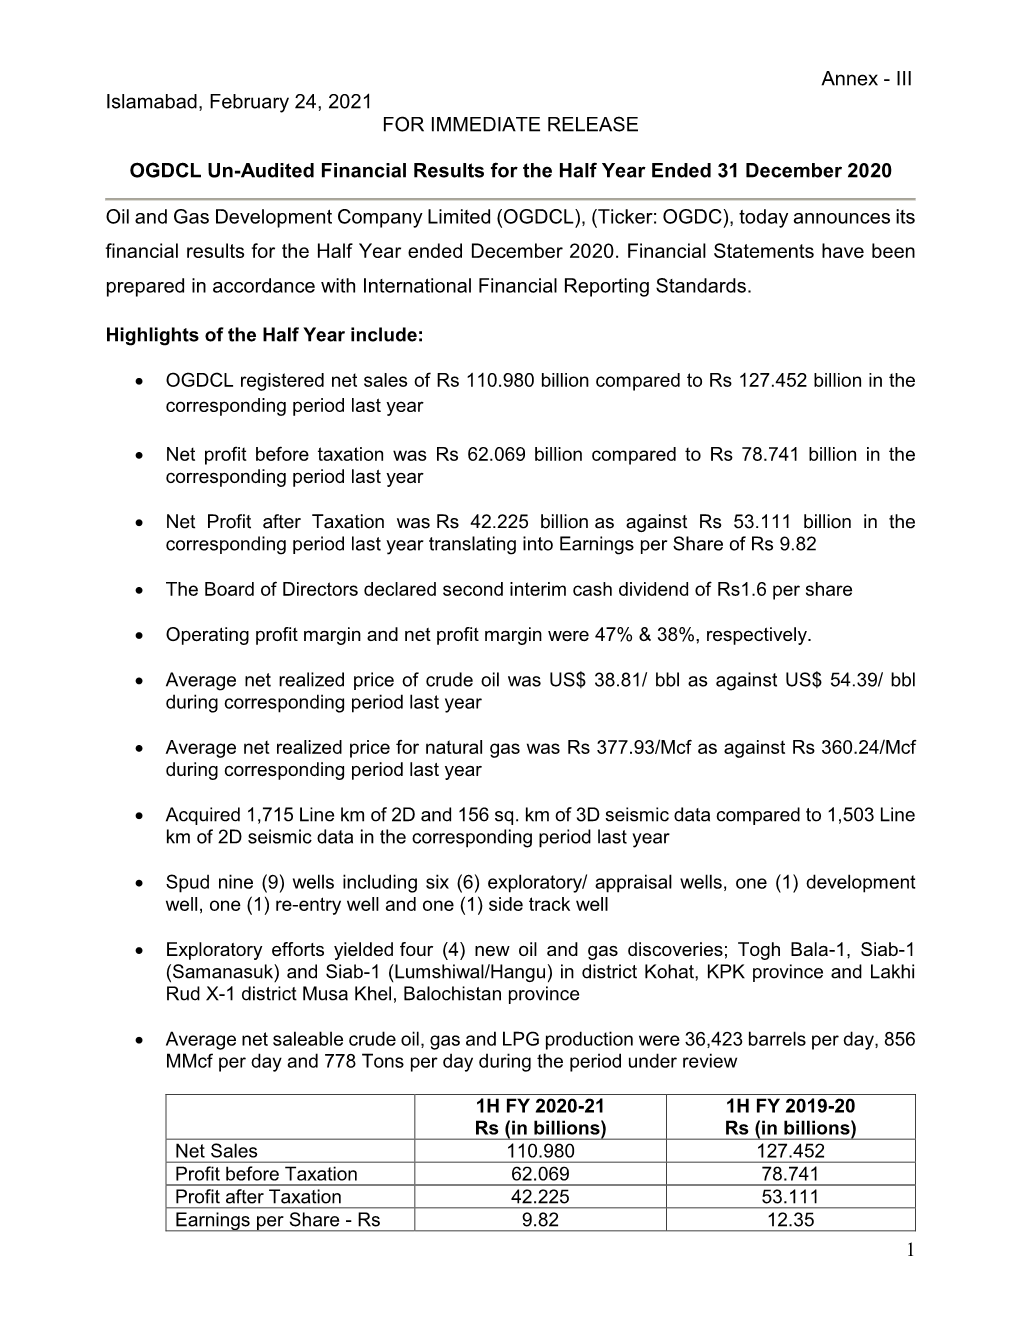 OGDCL Un-Audited Financial Results for the Quarter Ended